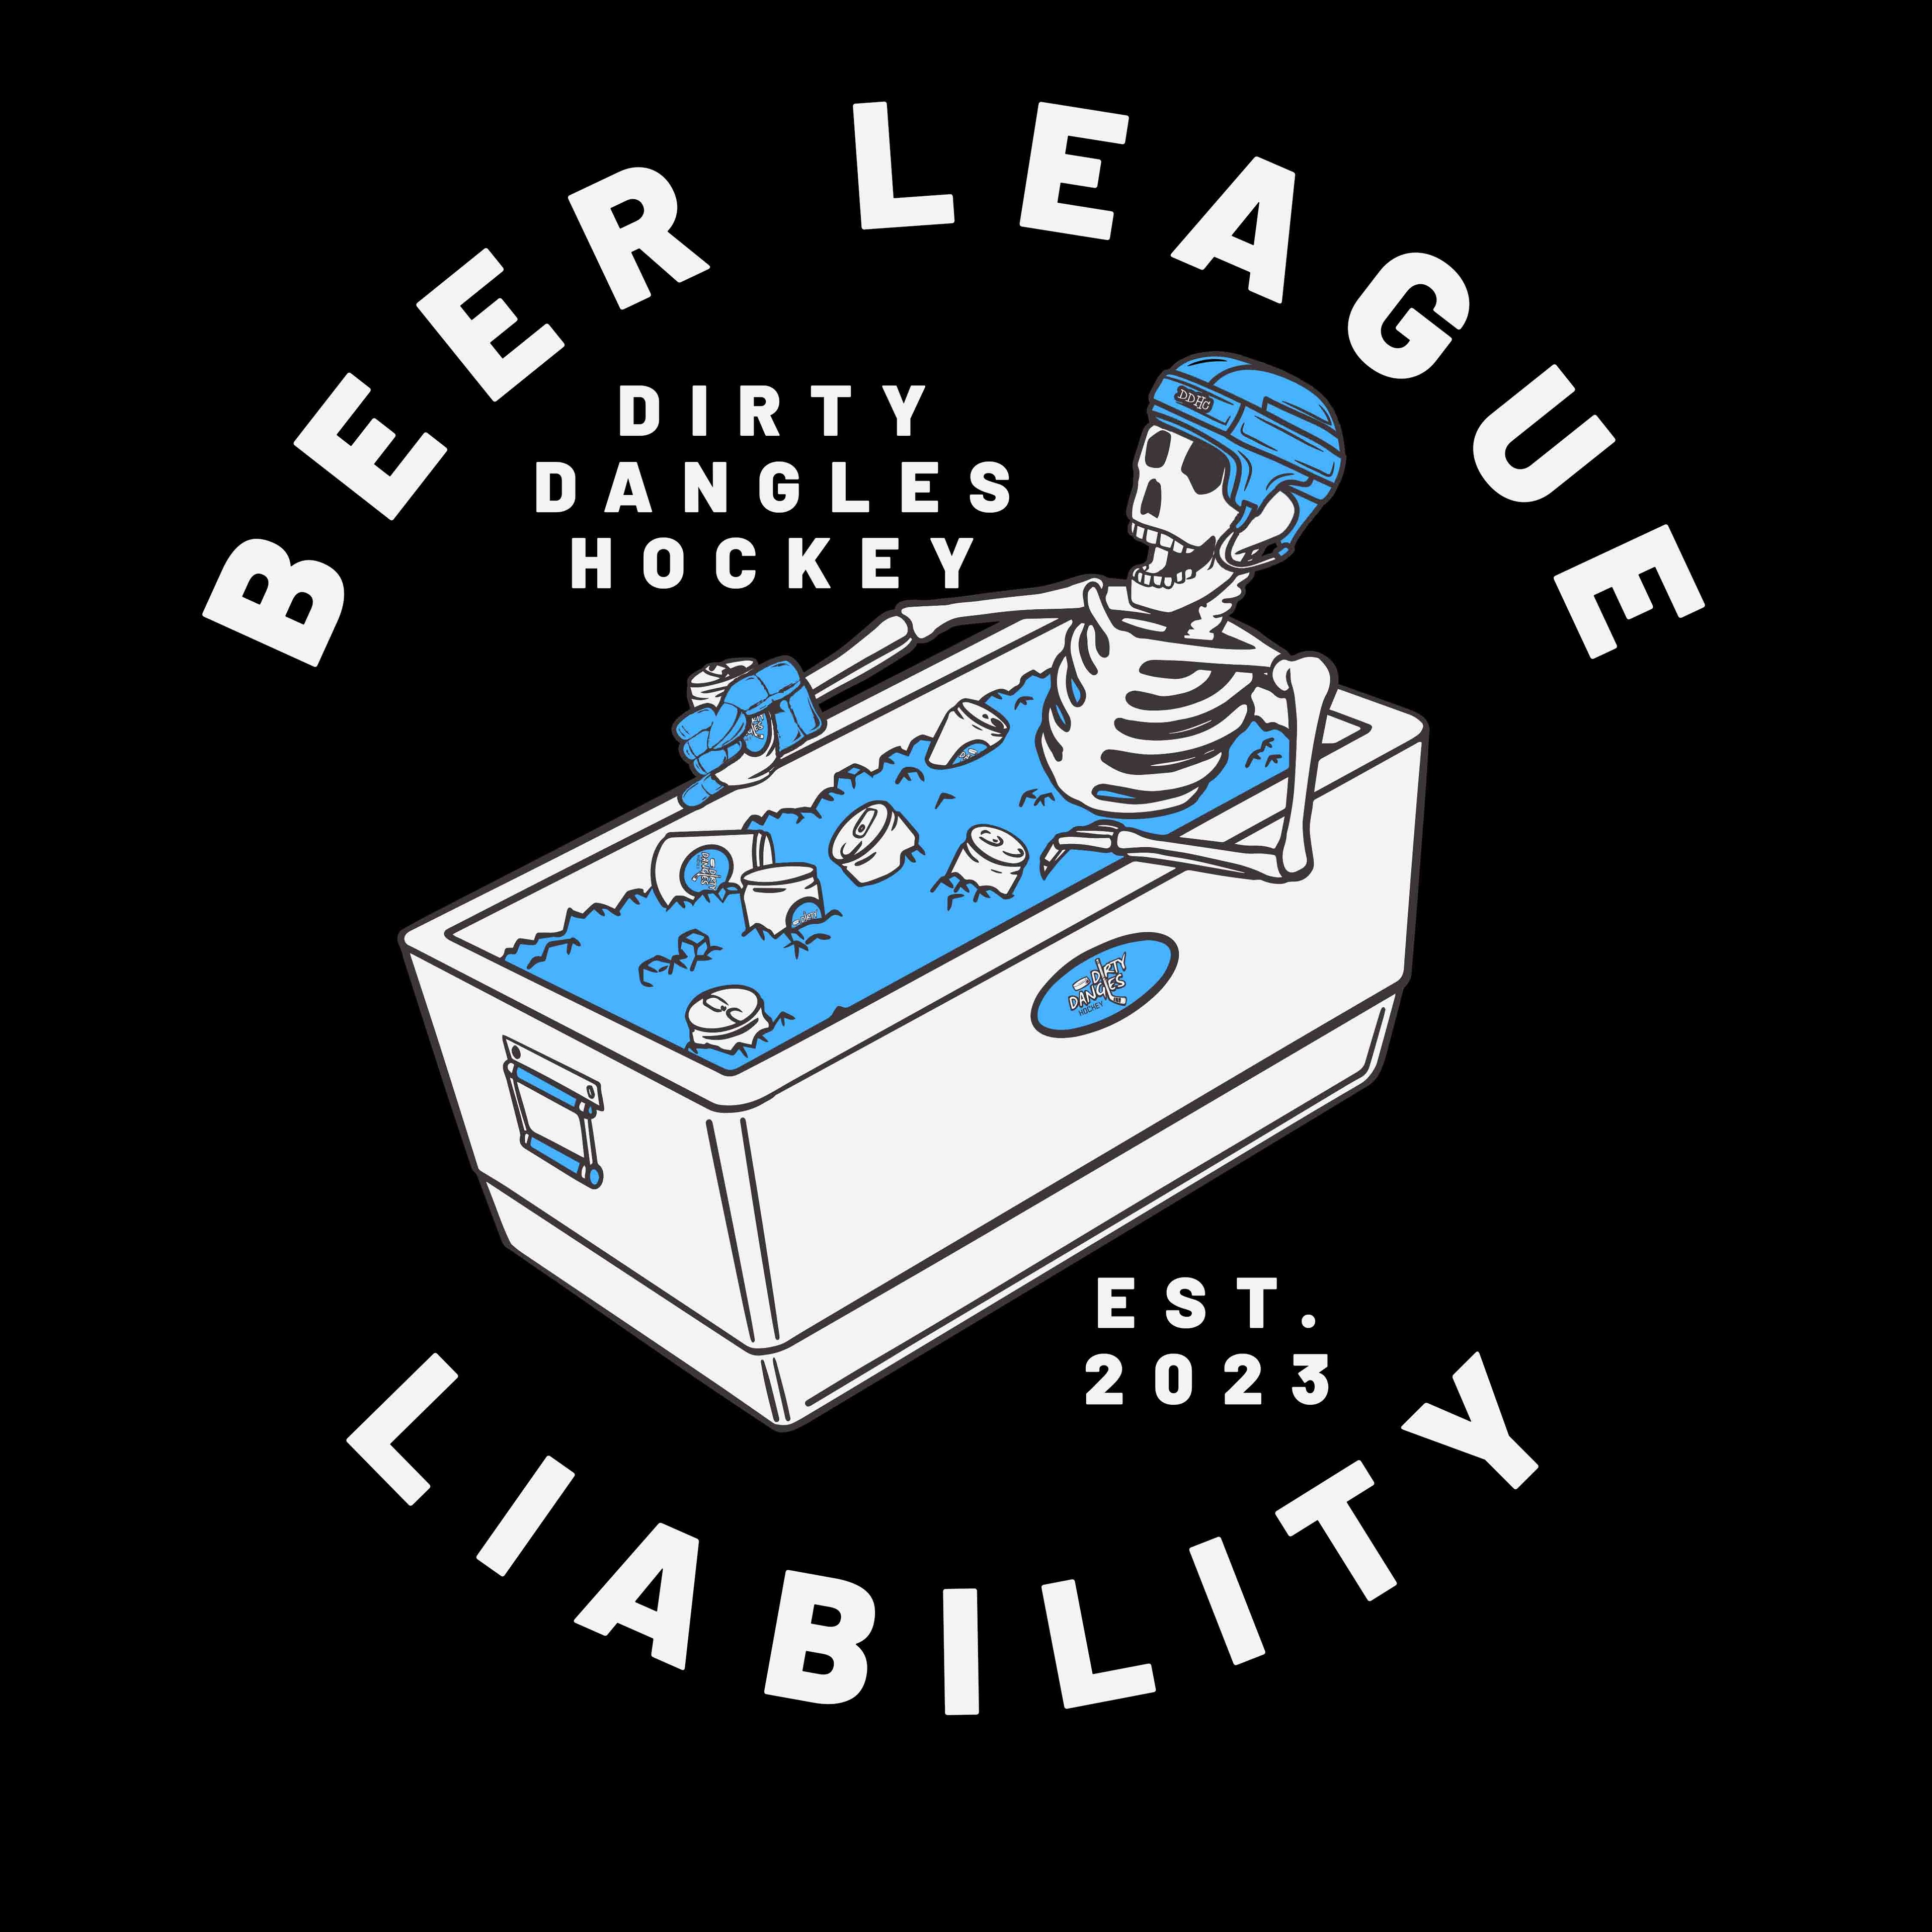 a skeleton drinking a beer while sitting in a cooler of ice. beer league liability dirty dangles hockey est 2023